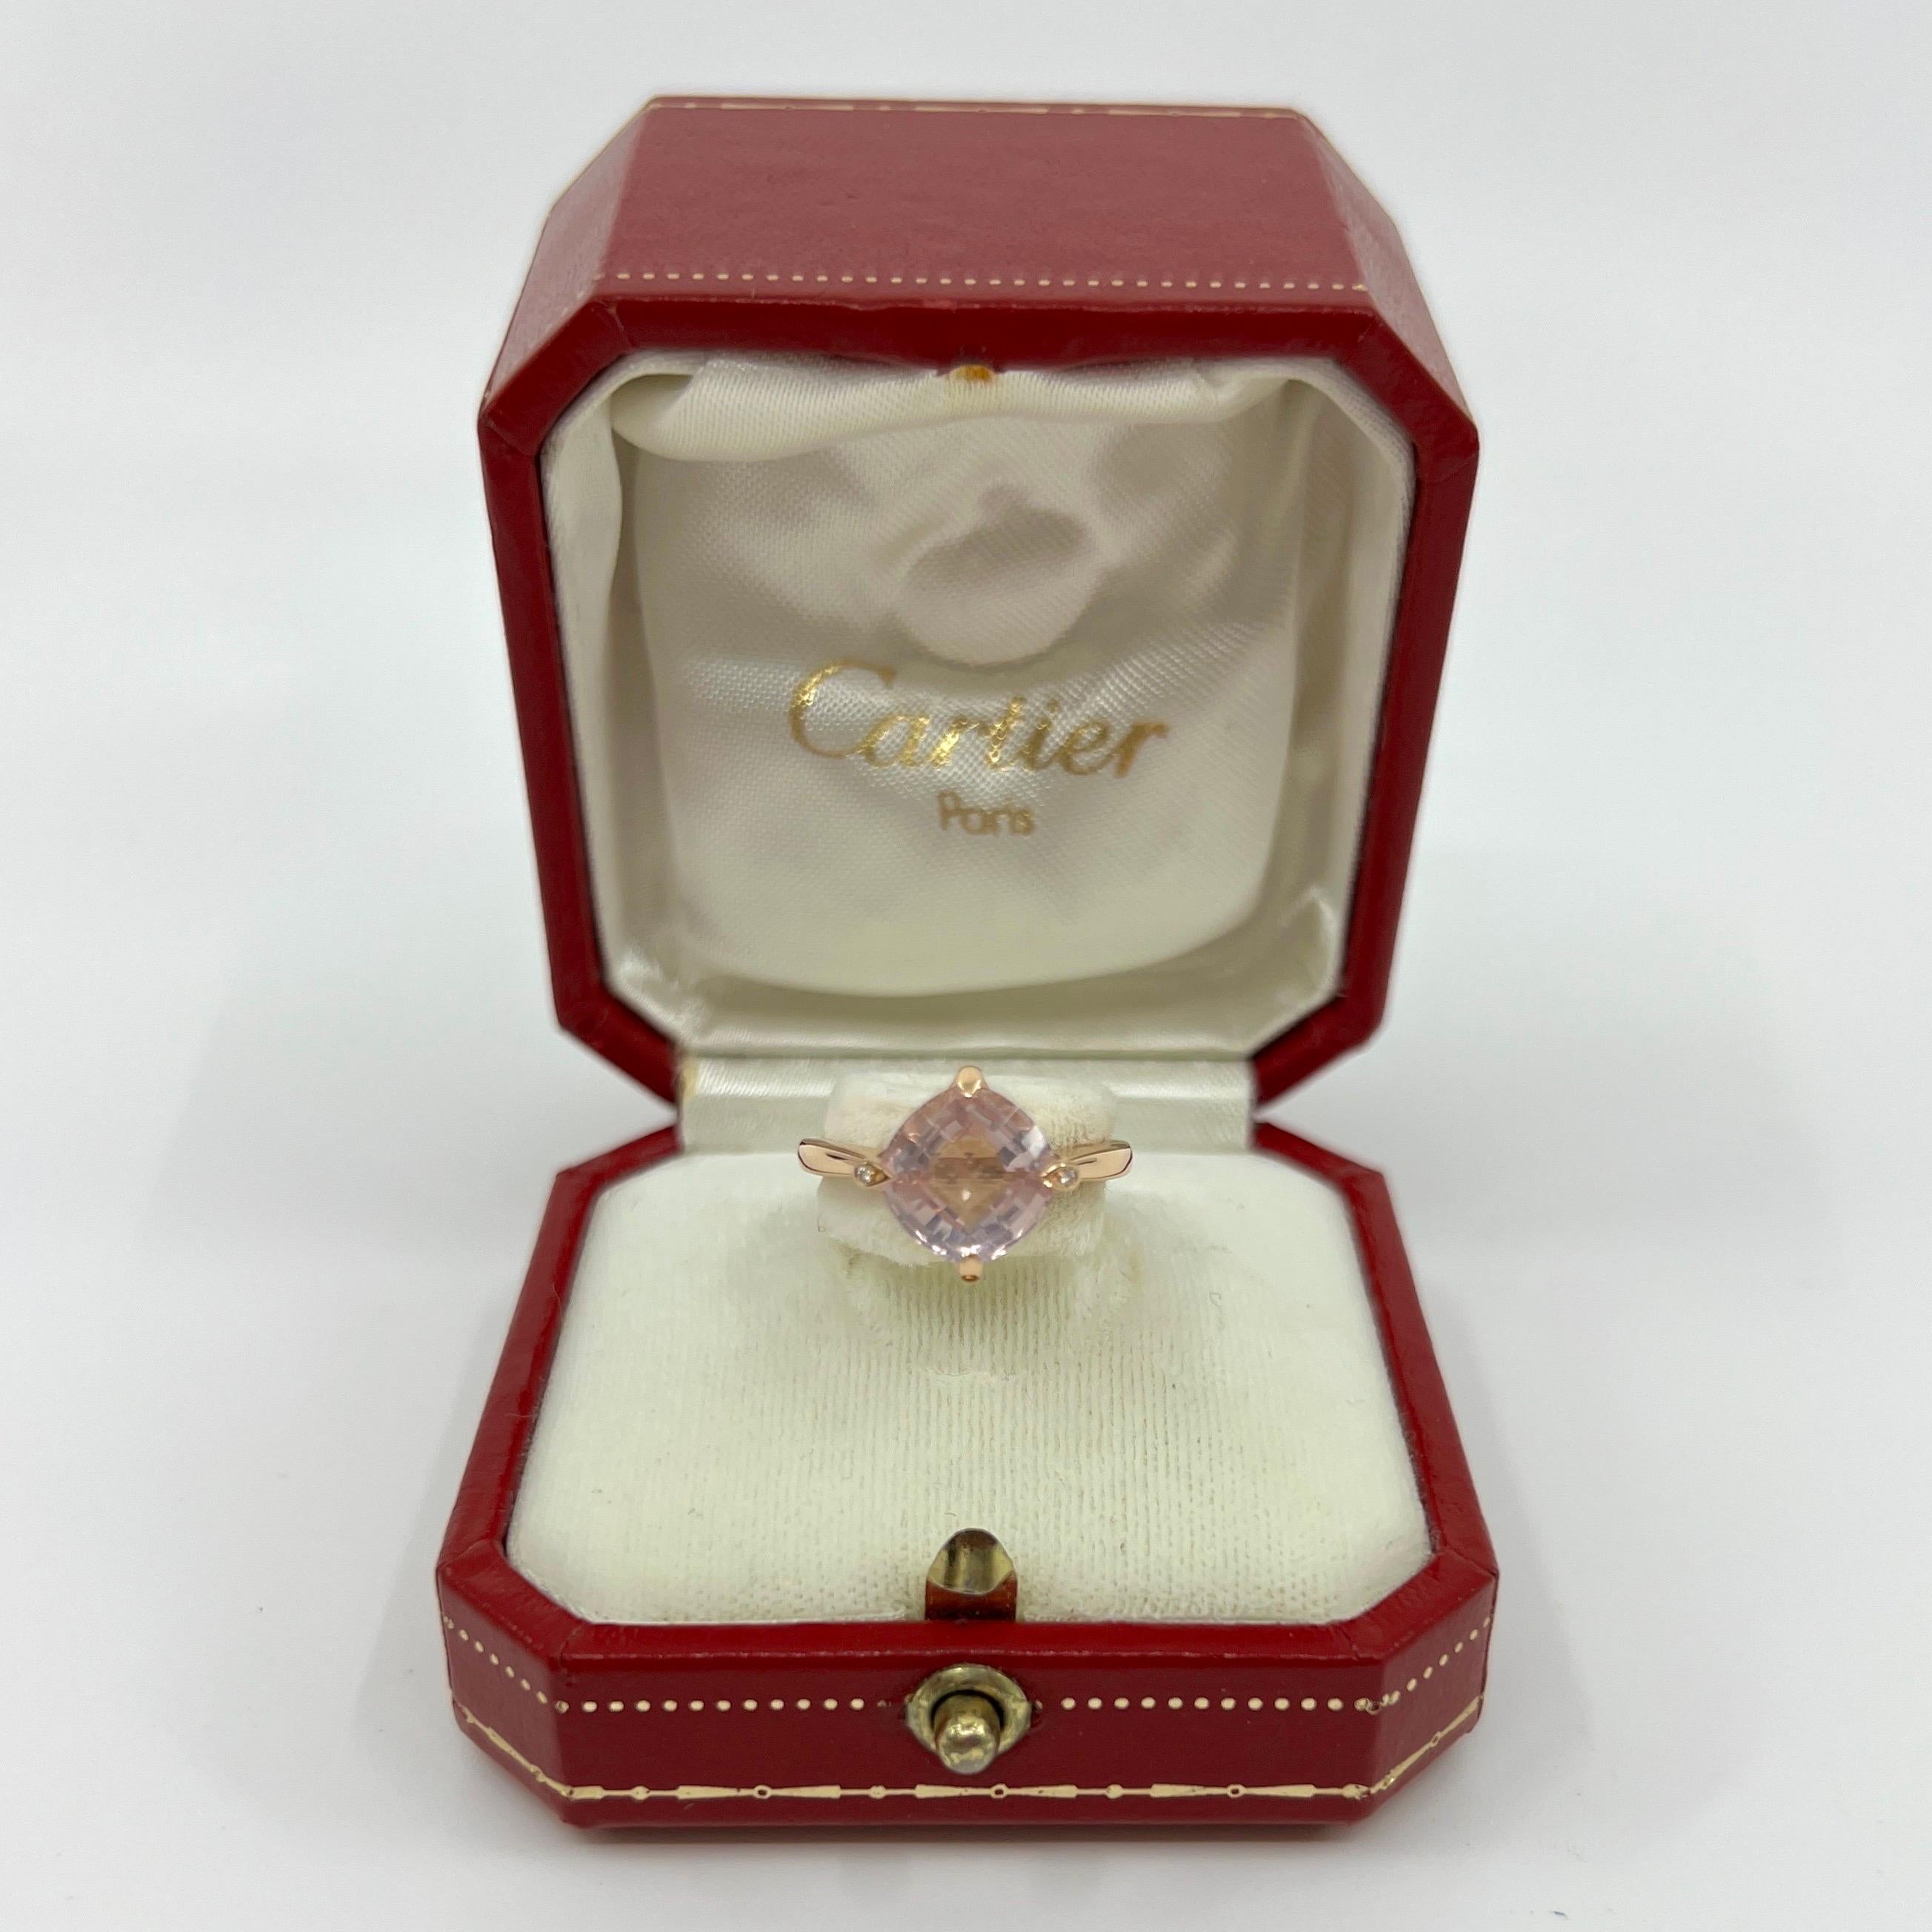 Very Rare Cartier Inde Mysterieuse Fancy Cut Rose De France Amethyst And Diamond 18k Rose Gold Ring.

Stunning rose gold ring with a fine 9mm claw set rose de France amethyst. 
Fine jewellery houses like Cartier only use the finest of gemstones and